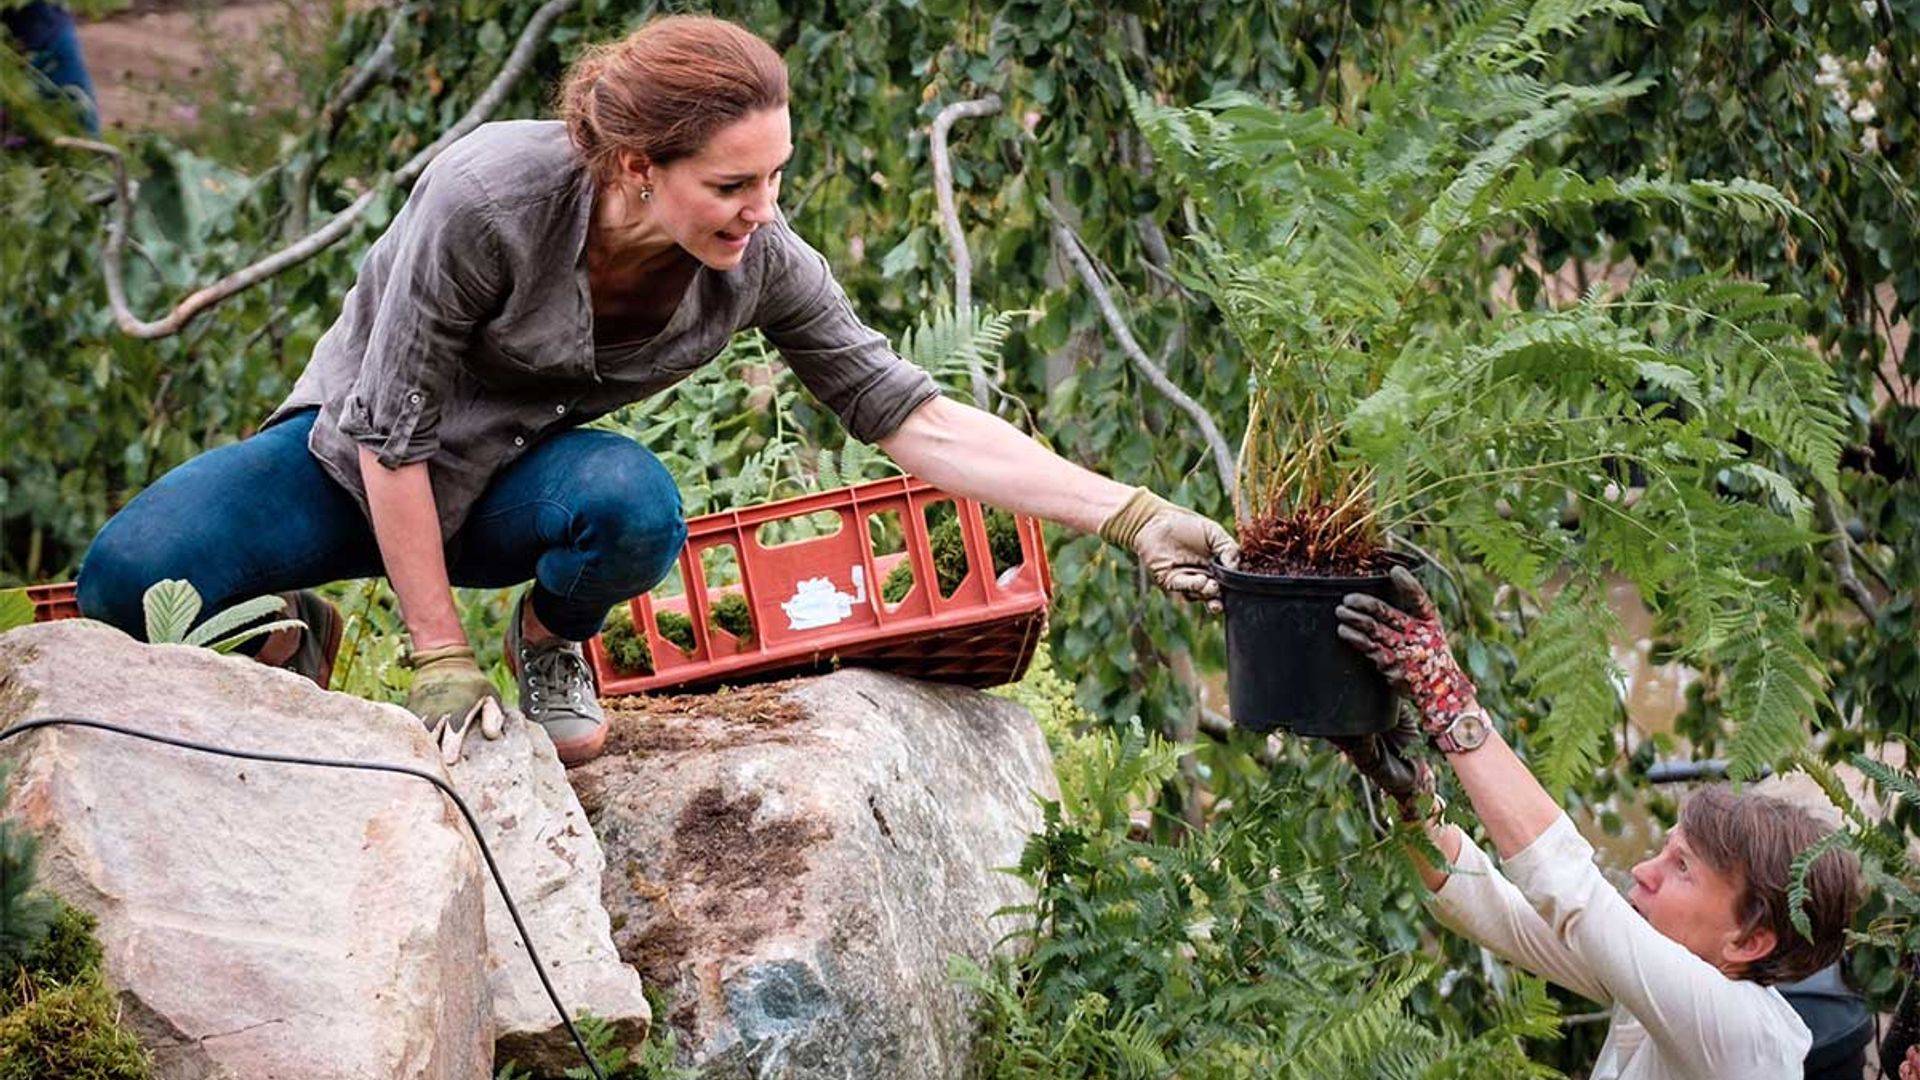 Kate Middleton shares throwback photo from her Back to Nature garden